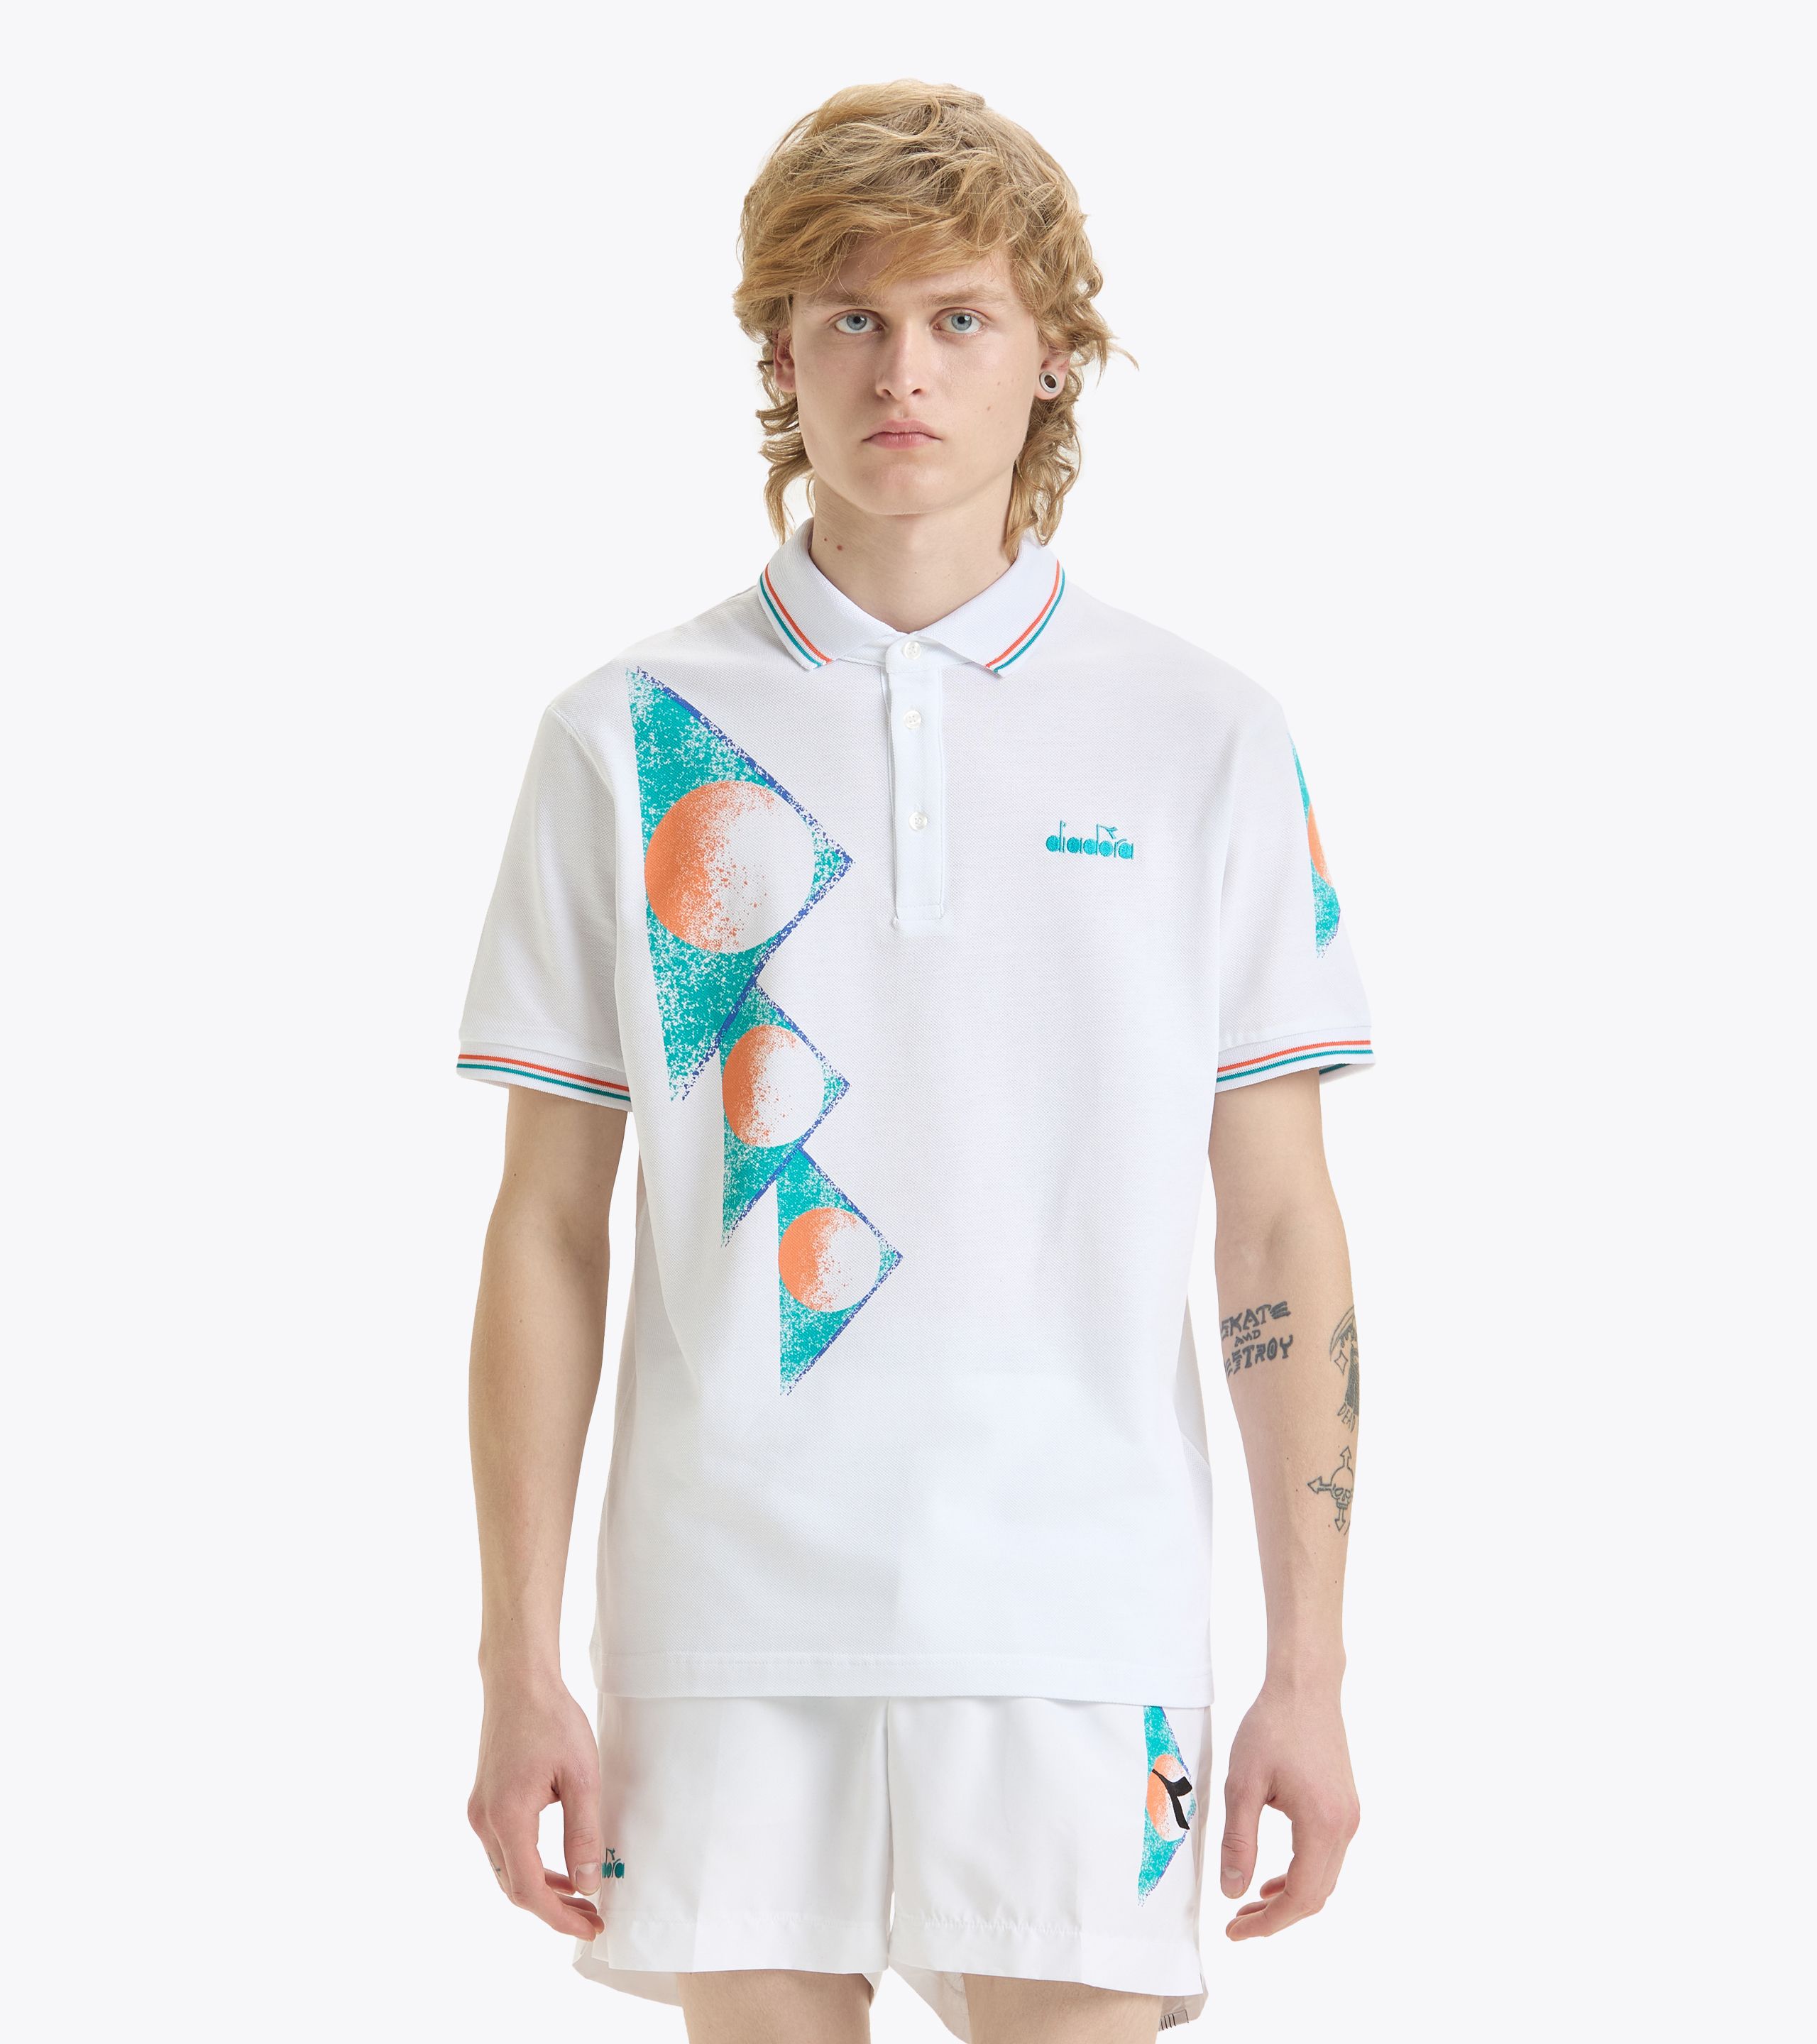 POLO SS TENNIS 90 90s-inspired Polo shirt - Made in Italy - Men's 